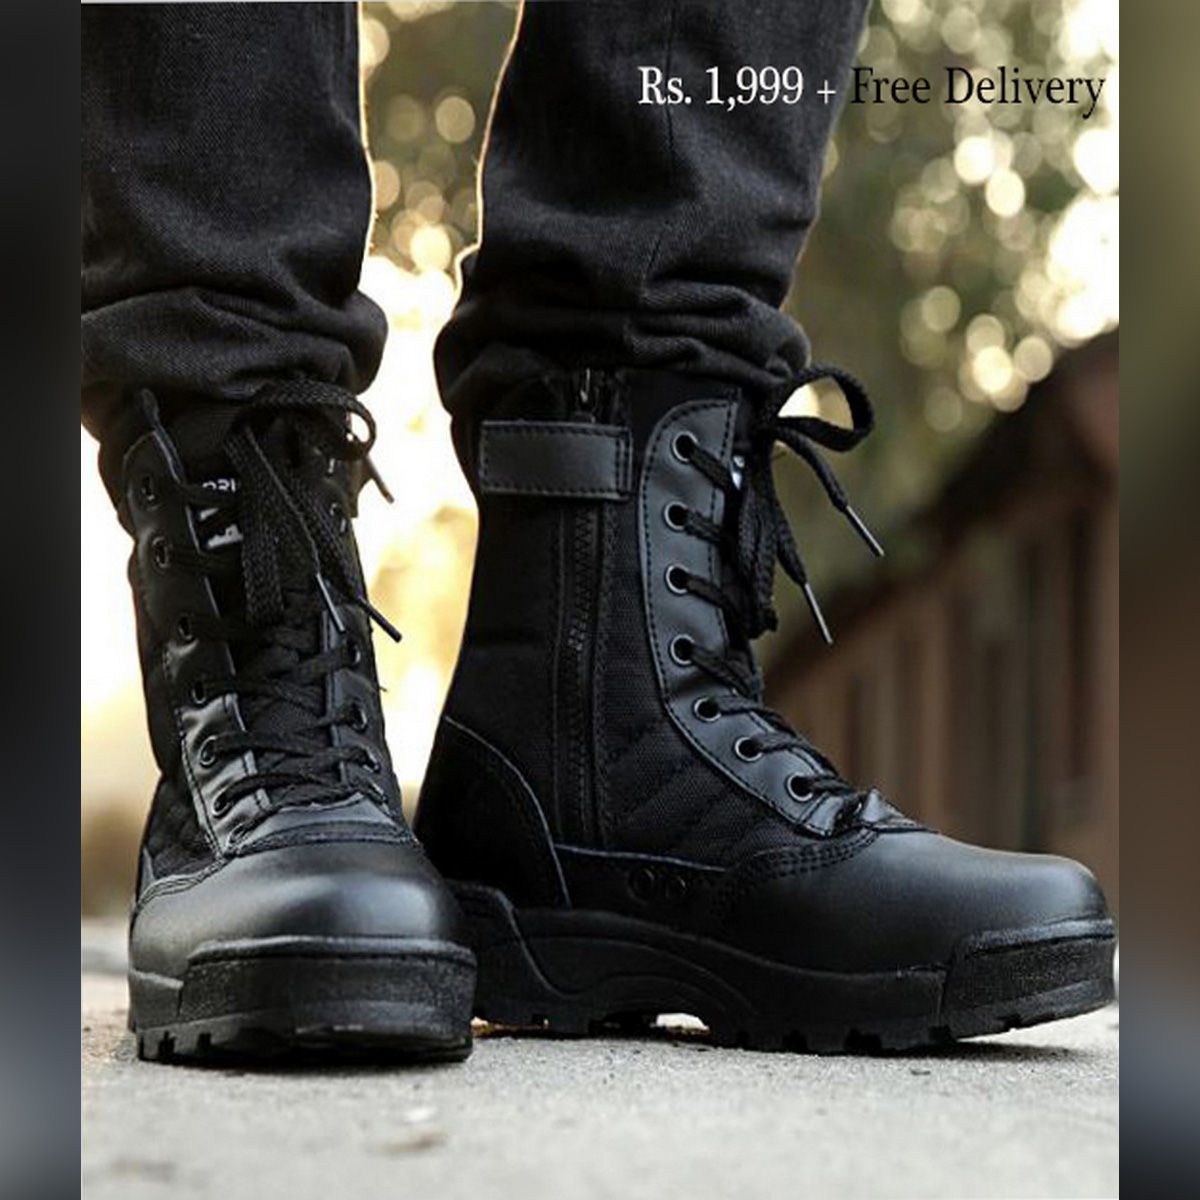 New commando delta shoes ankle long Army boots